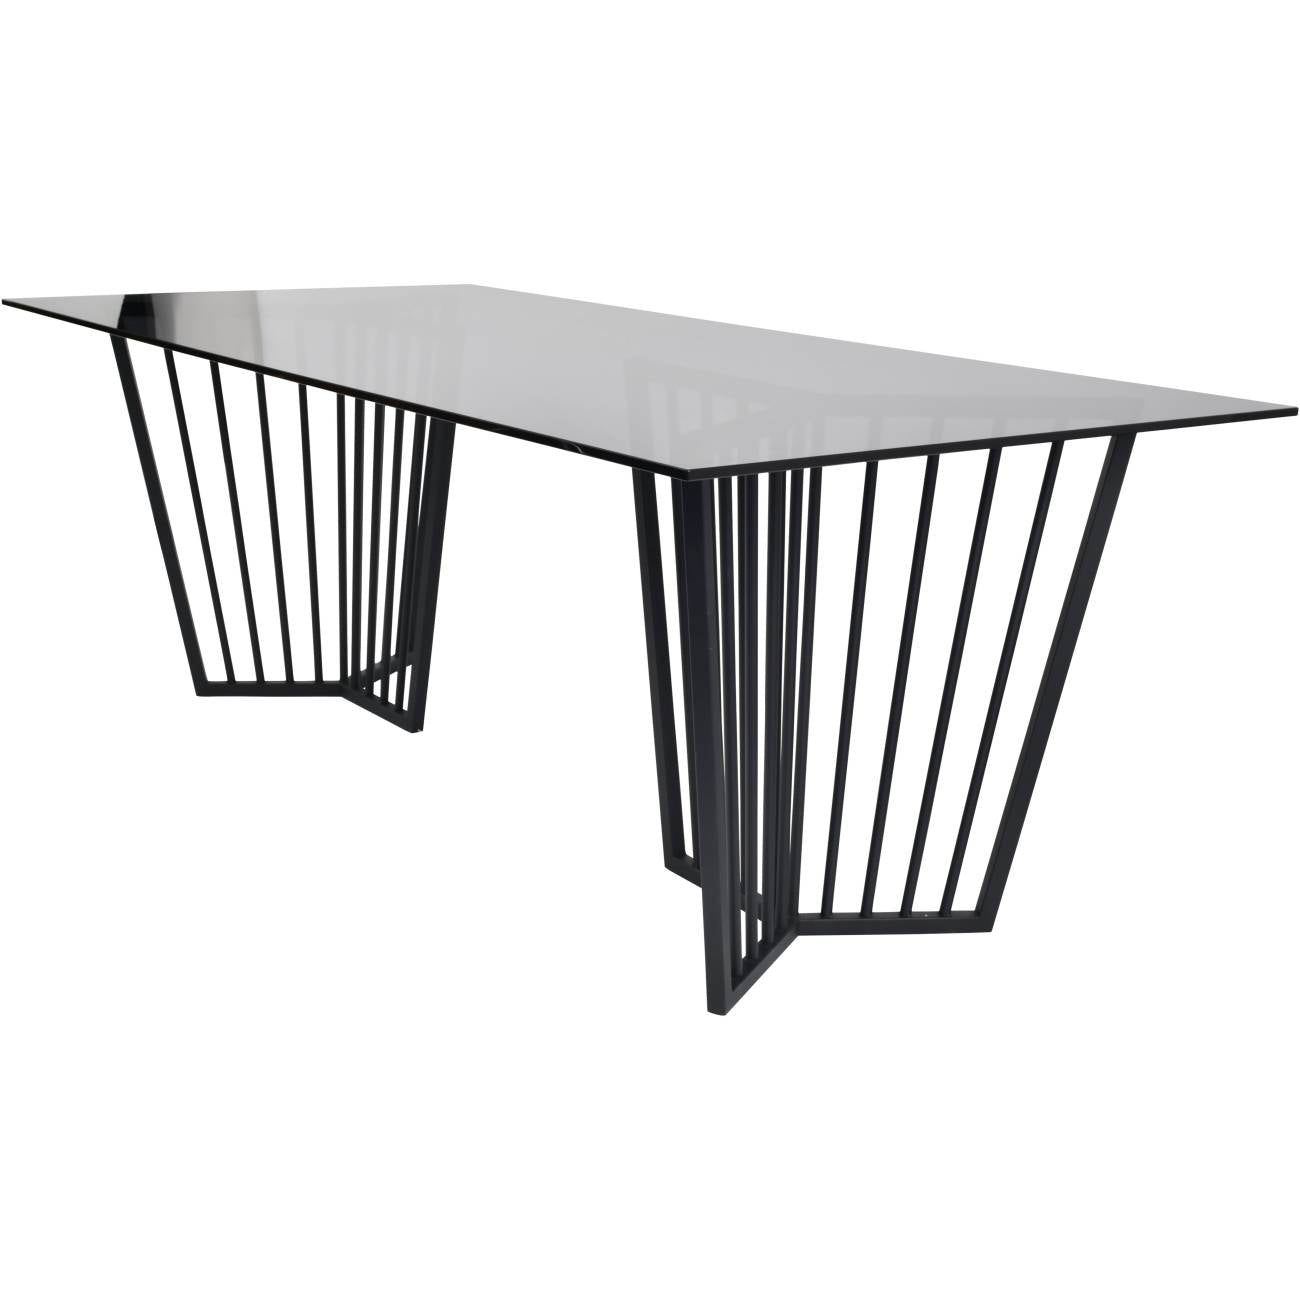 Kensington Black Frame and Tinted Glass Dining Table